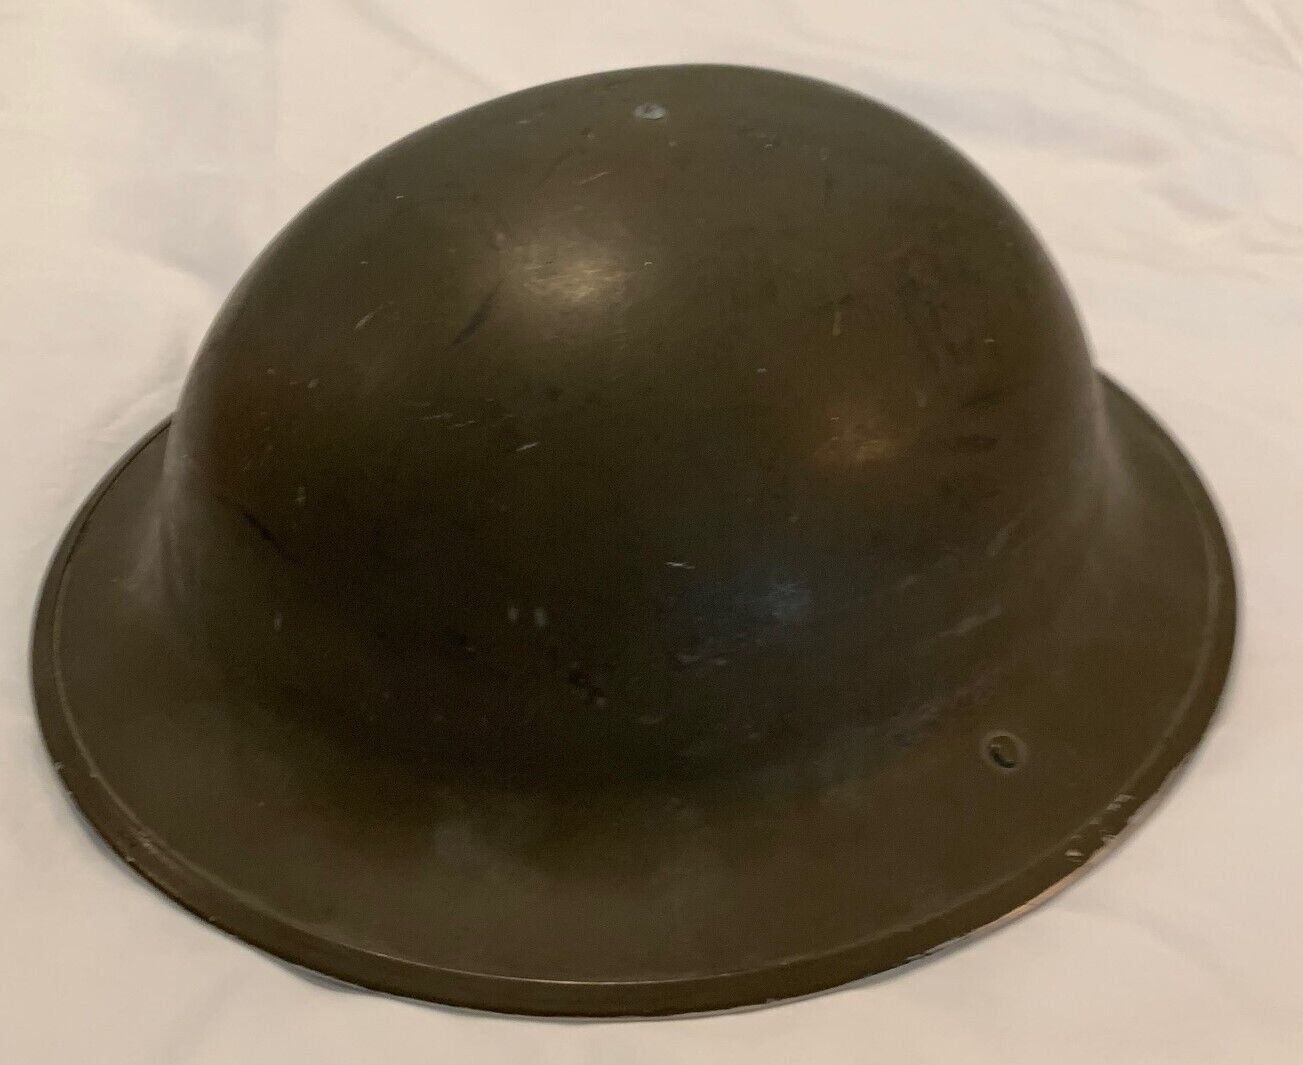 British Canadian GSW MK1 1942 Helmet with Liner dated 1941 Size 7 3/4